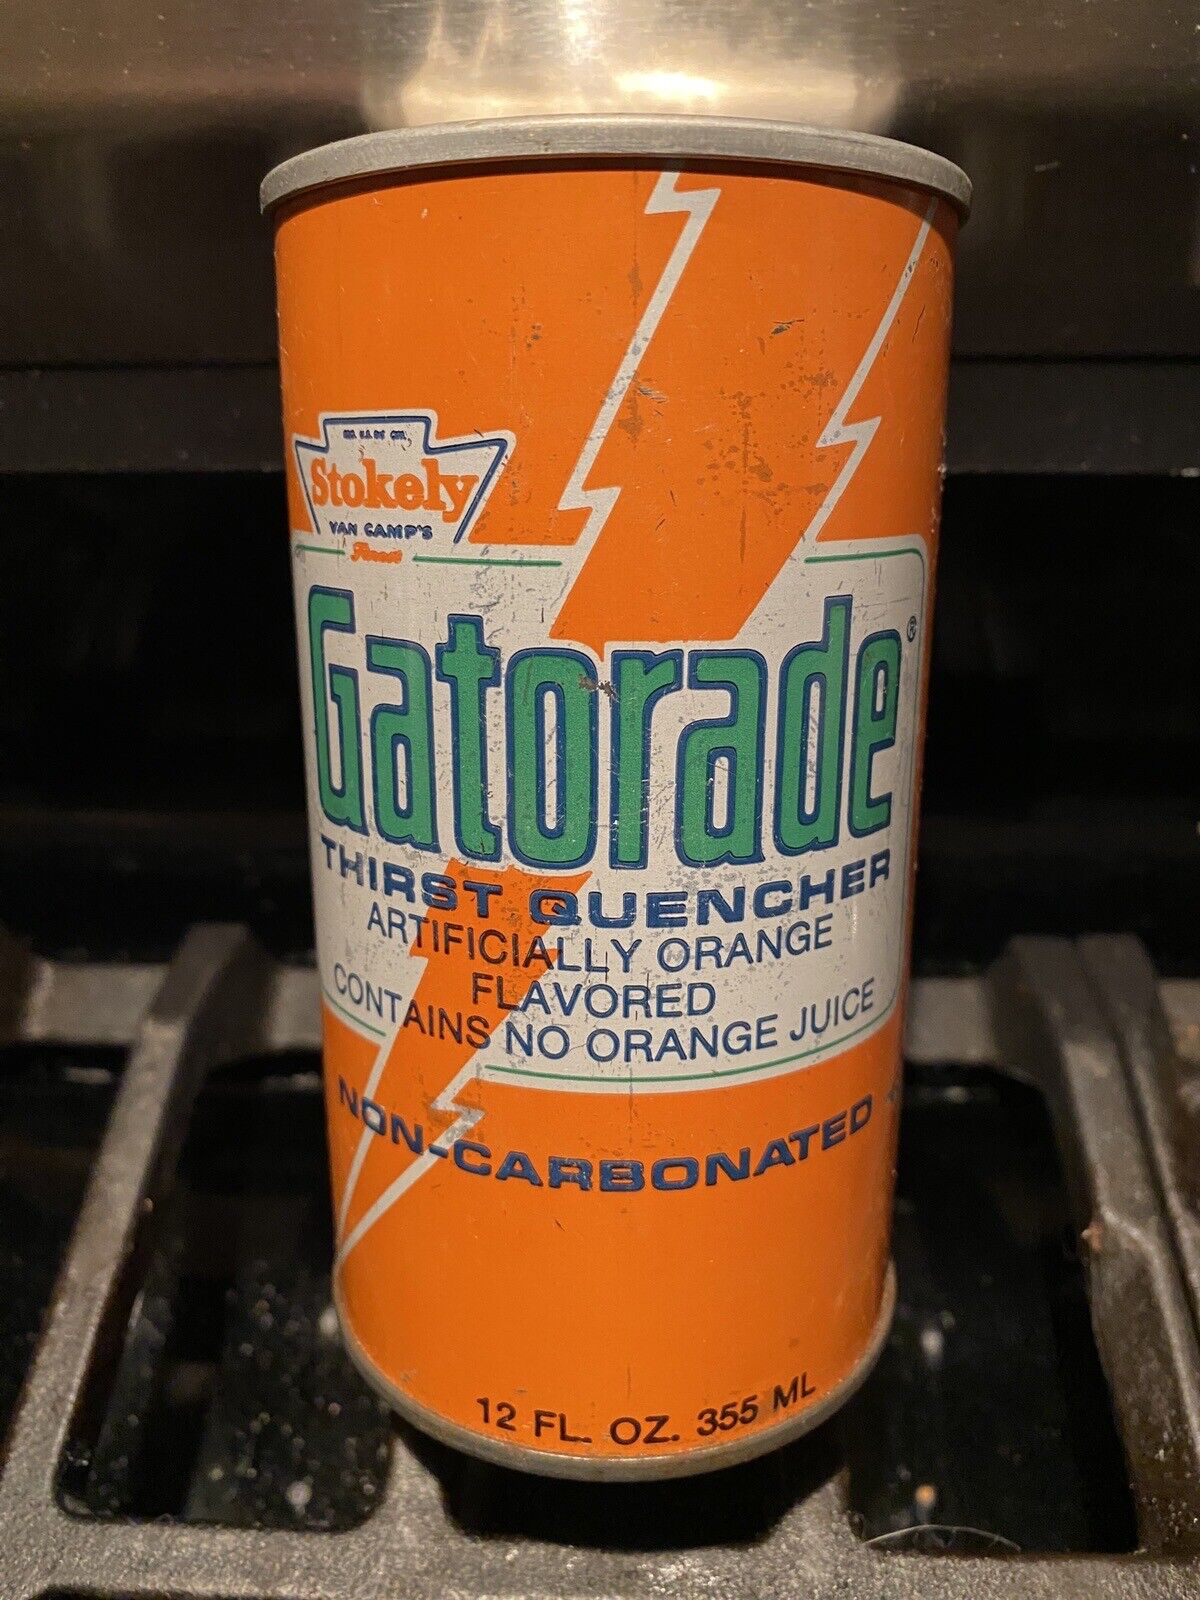 GATORADE ORANGE 🍊THIRST QUENCHER S/S 1979 SWEET EXAMPLE DRINK 🥤 CAN